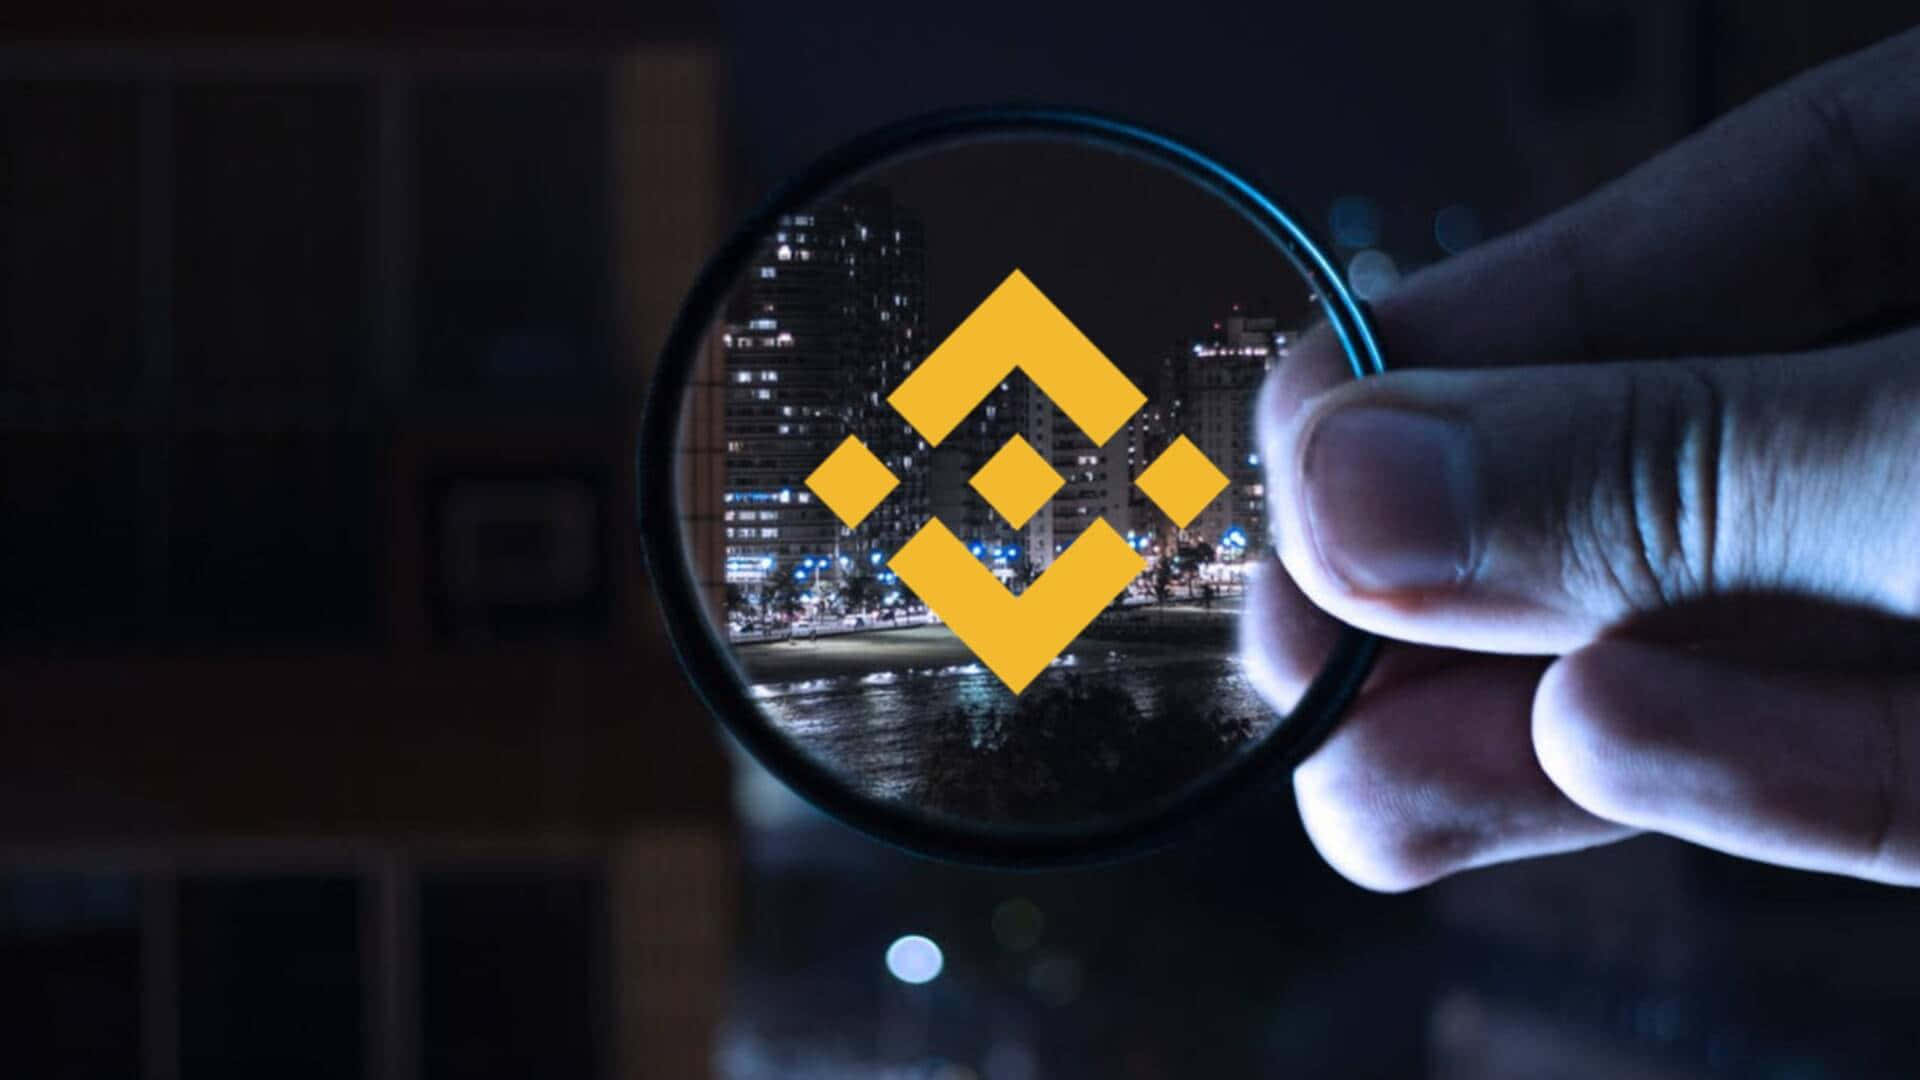 Image  Binance Cryptocurrency Exchange at the Forefront of the Crypto Revolution